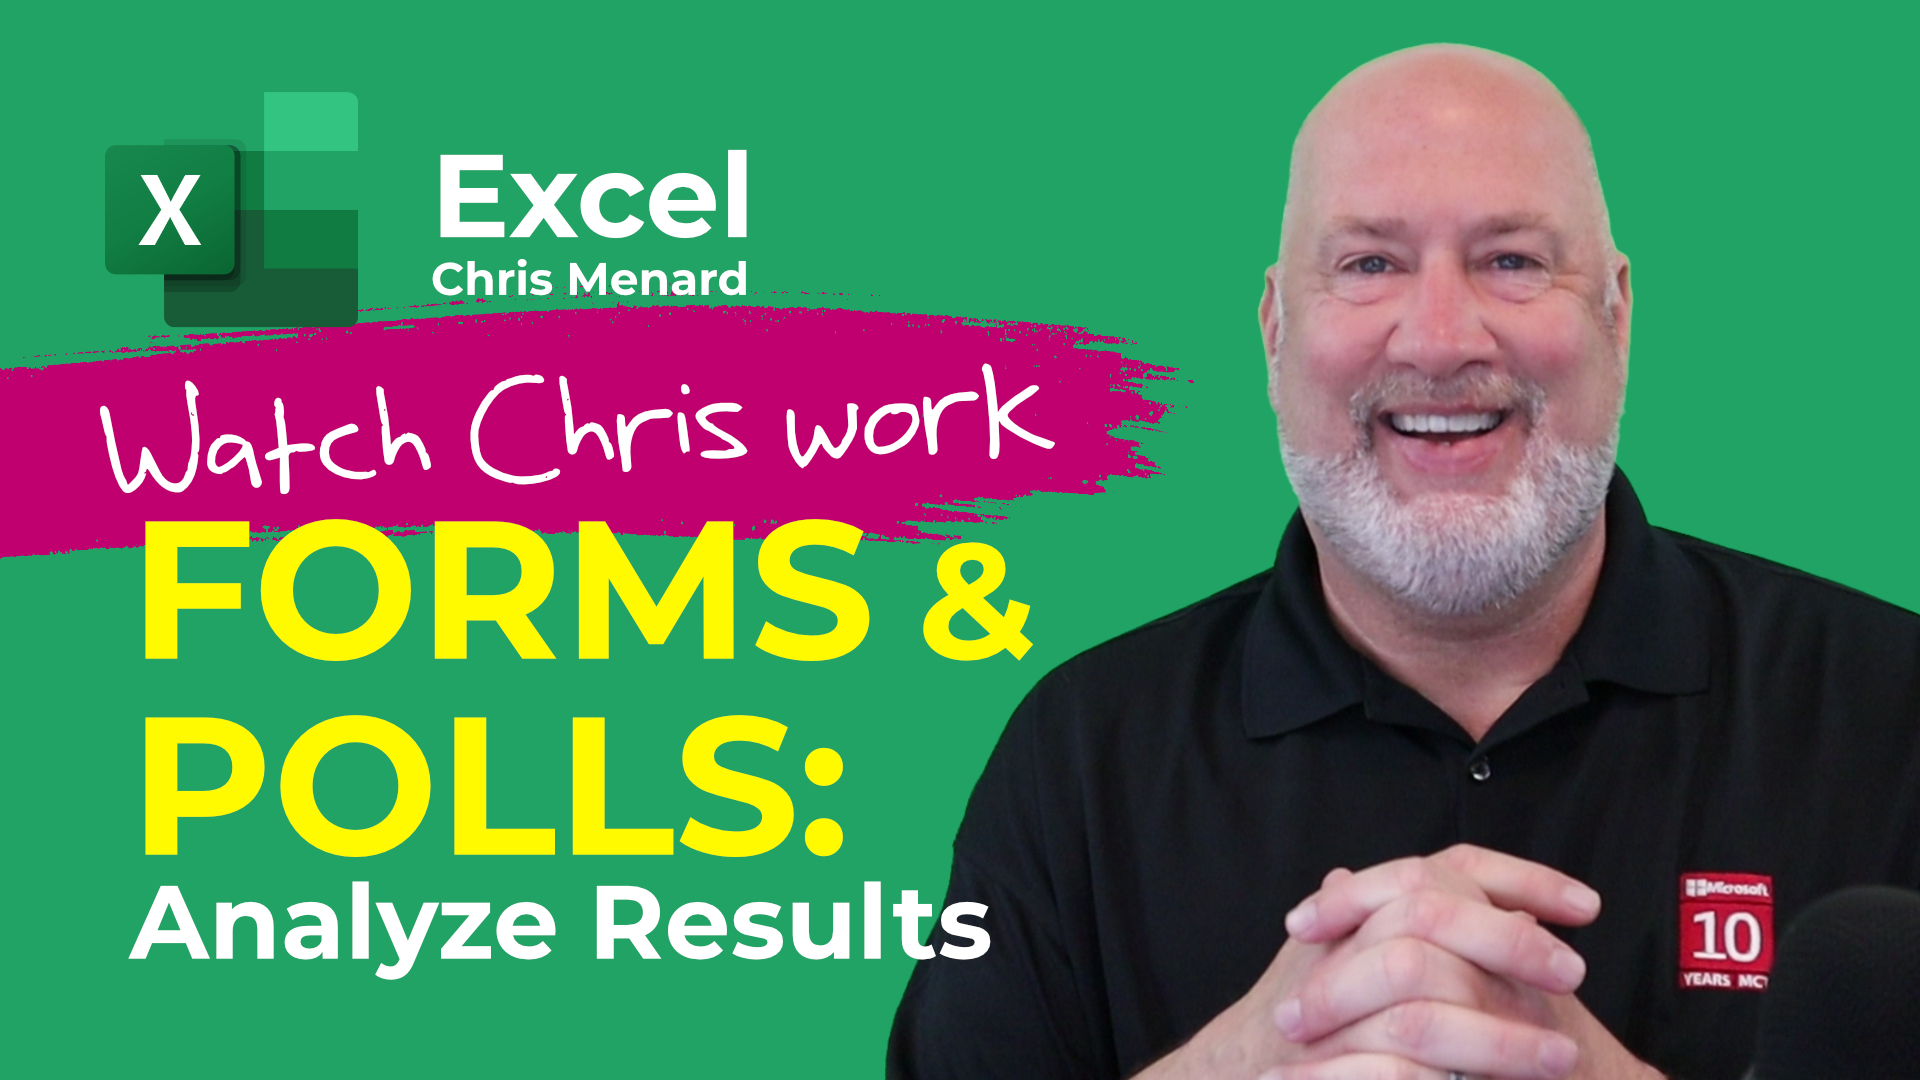 Analyze Results from Microsoft FORMS POLLS in Excel  | Watch Chris Work